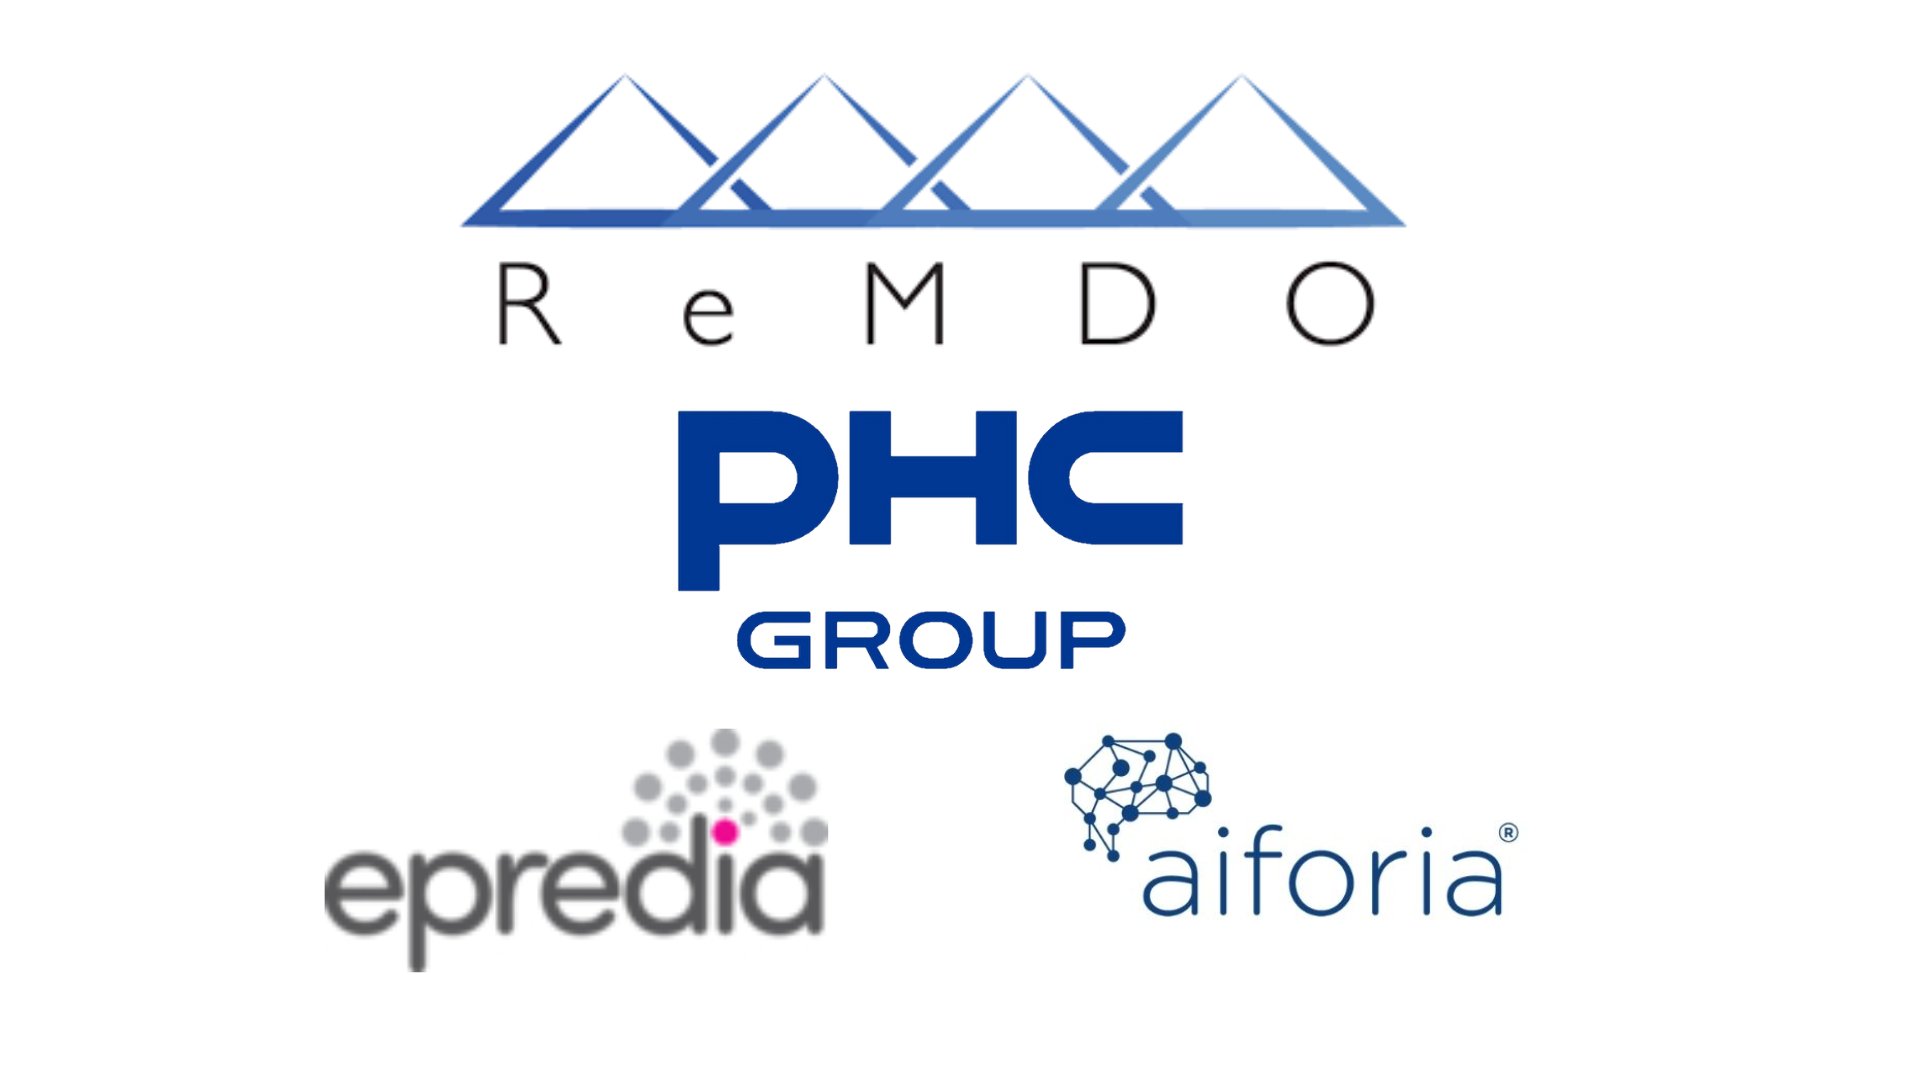 PHC Group is expanding its presence in regenerative medicine by joining the RegeneratOR Innovation Accelerator.